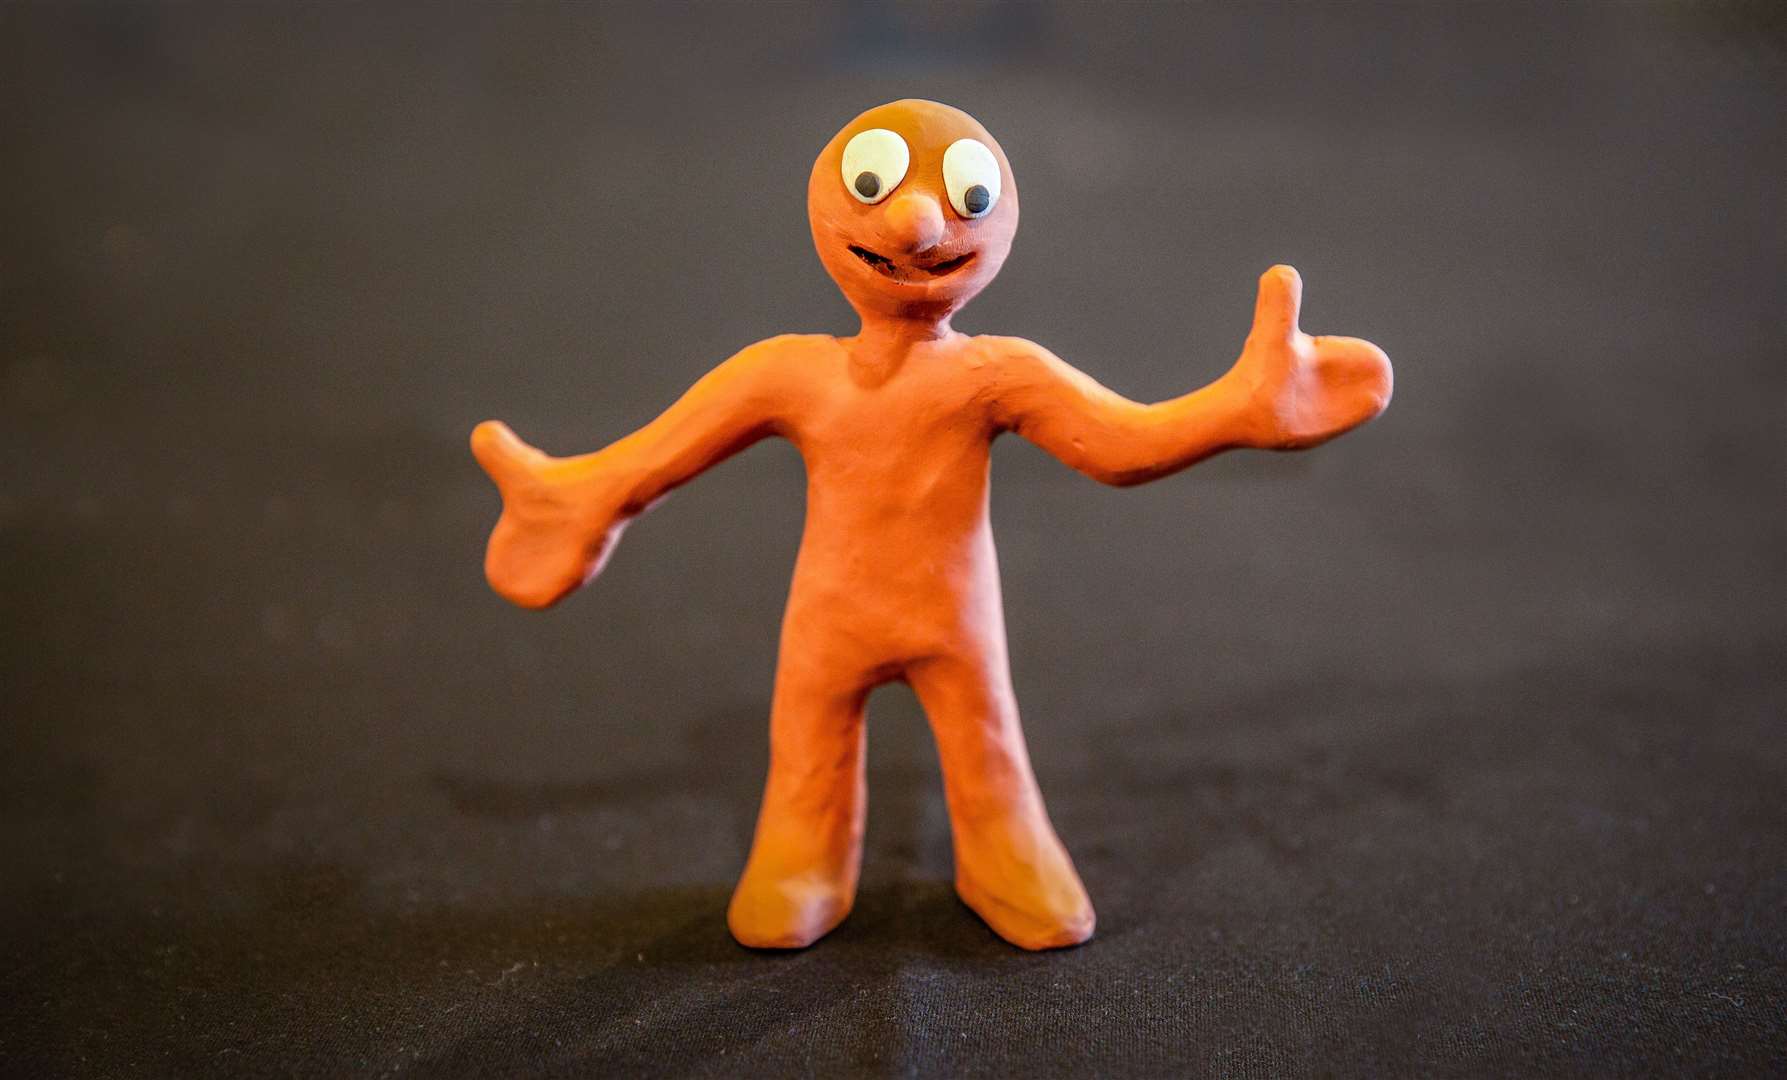 You can make a Morph when Aardman Animations are at Dreamland